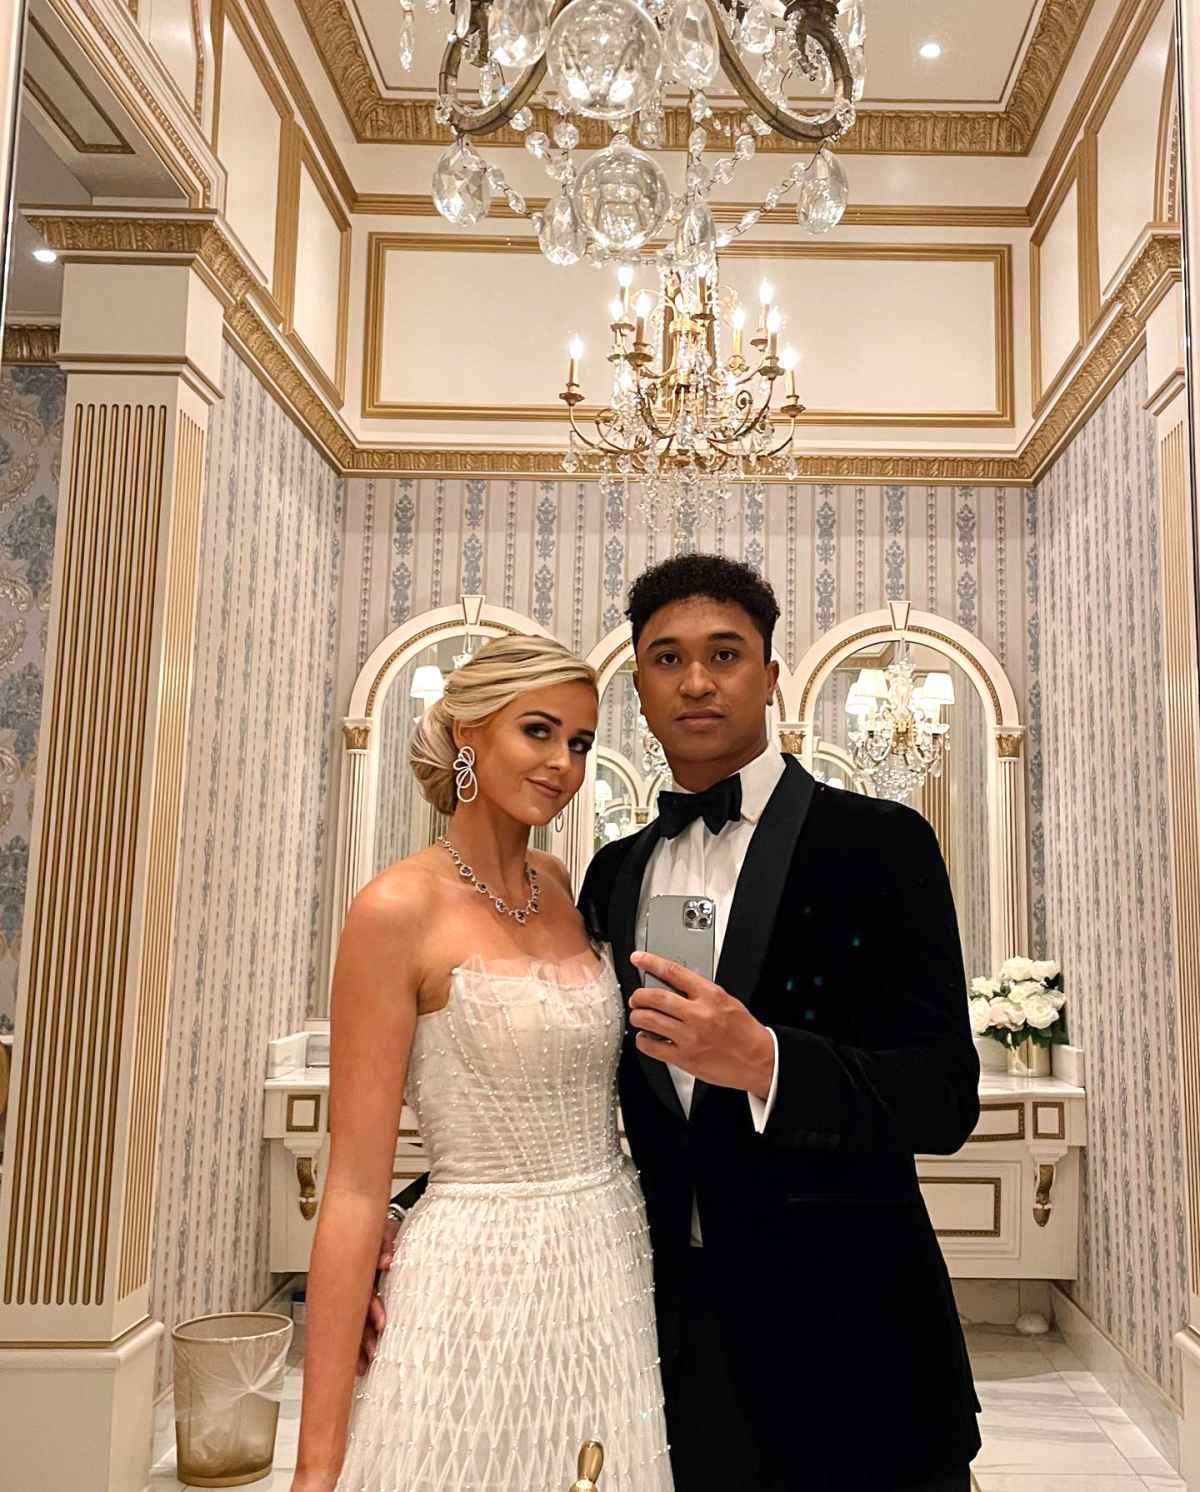 Dancing Through Life! 'DWTS' Pro Brandon Armstrong Marries Brylee Ivers